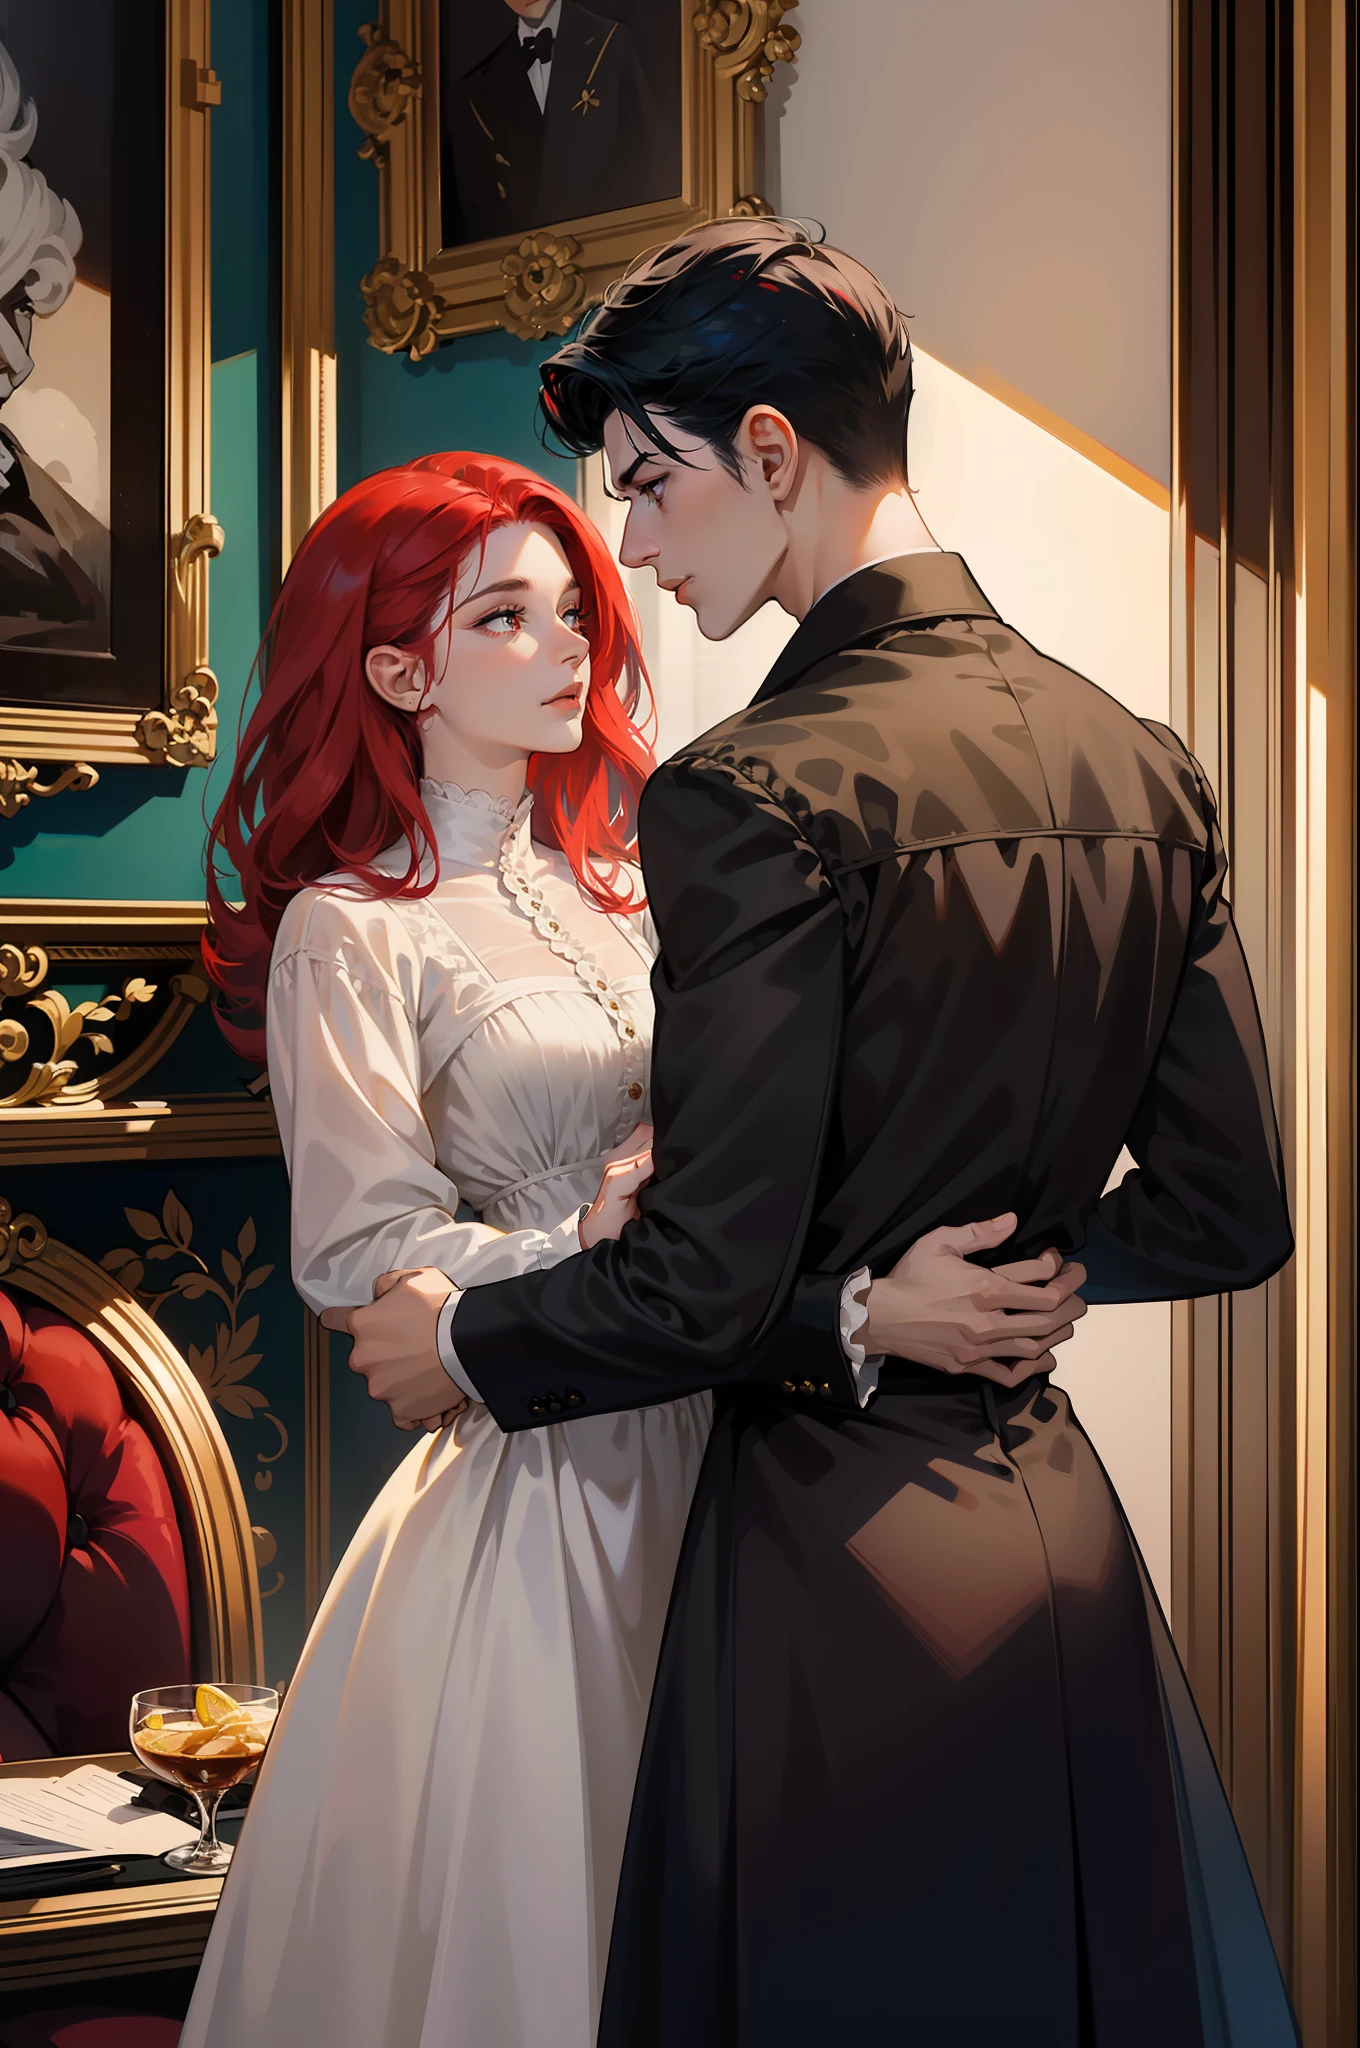 ((Masterpieces)), Best Quality, outstanding illustration, (((A couple seeing each other))), soft focus, (((1 boy with short black hair))) (((blue eyes))) (((dark wizard clothing))), (((1 girl from (((Red hair))) long curly))) (((gold eyes))) (((elaborate and beautiful WHITE wedding dress))), victorian clothing, Victorian and magical romanticism, opulent and exquisite atmosphere, Soft light and warm lighting.